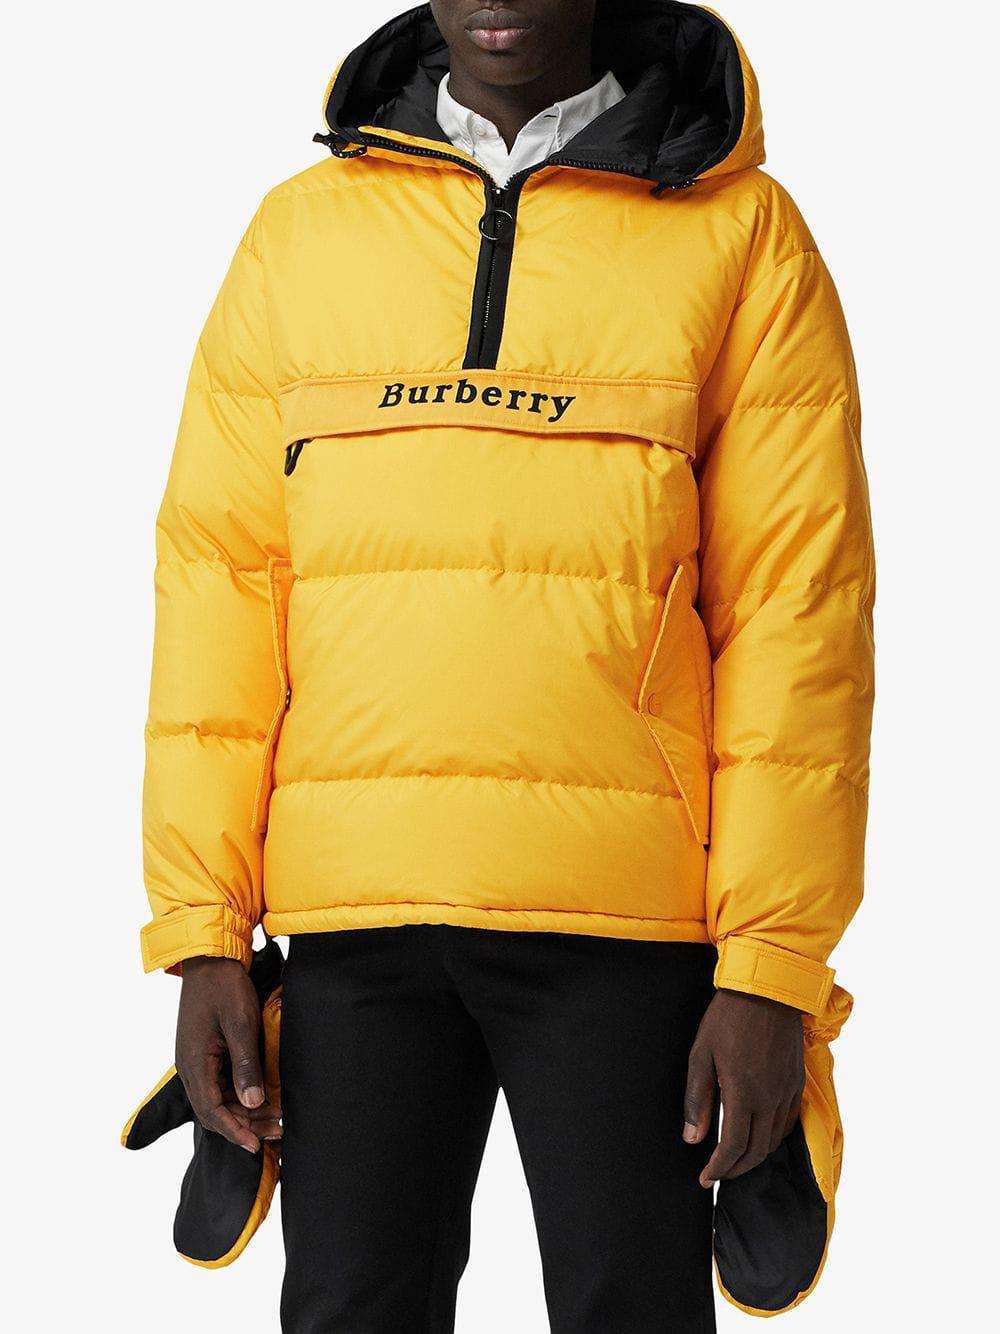 burberry pullover jacket